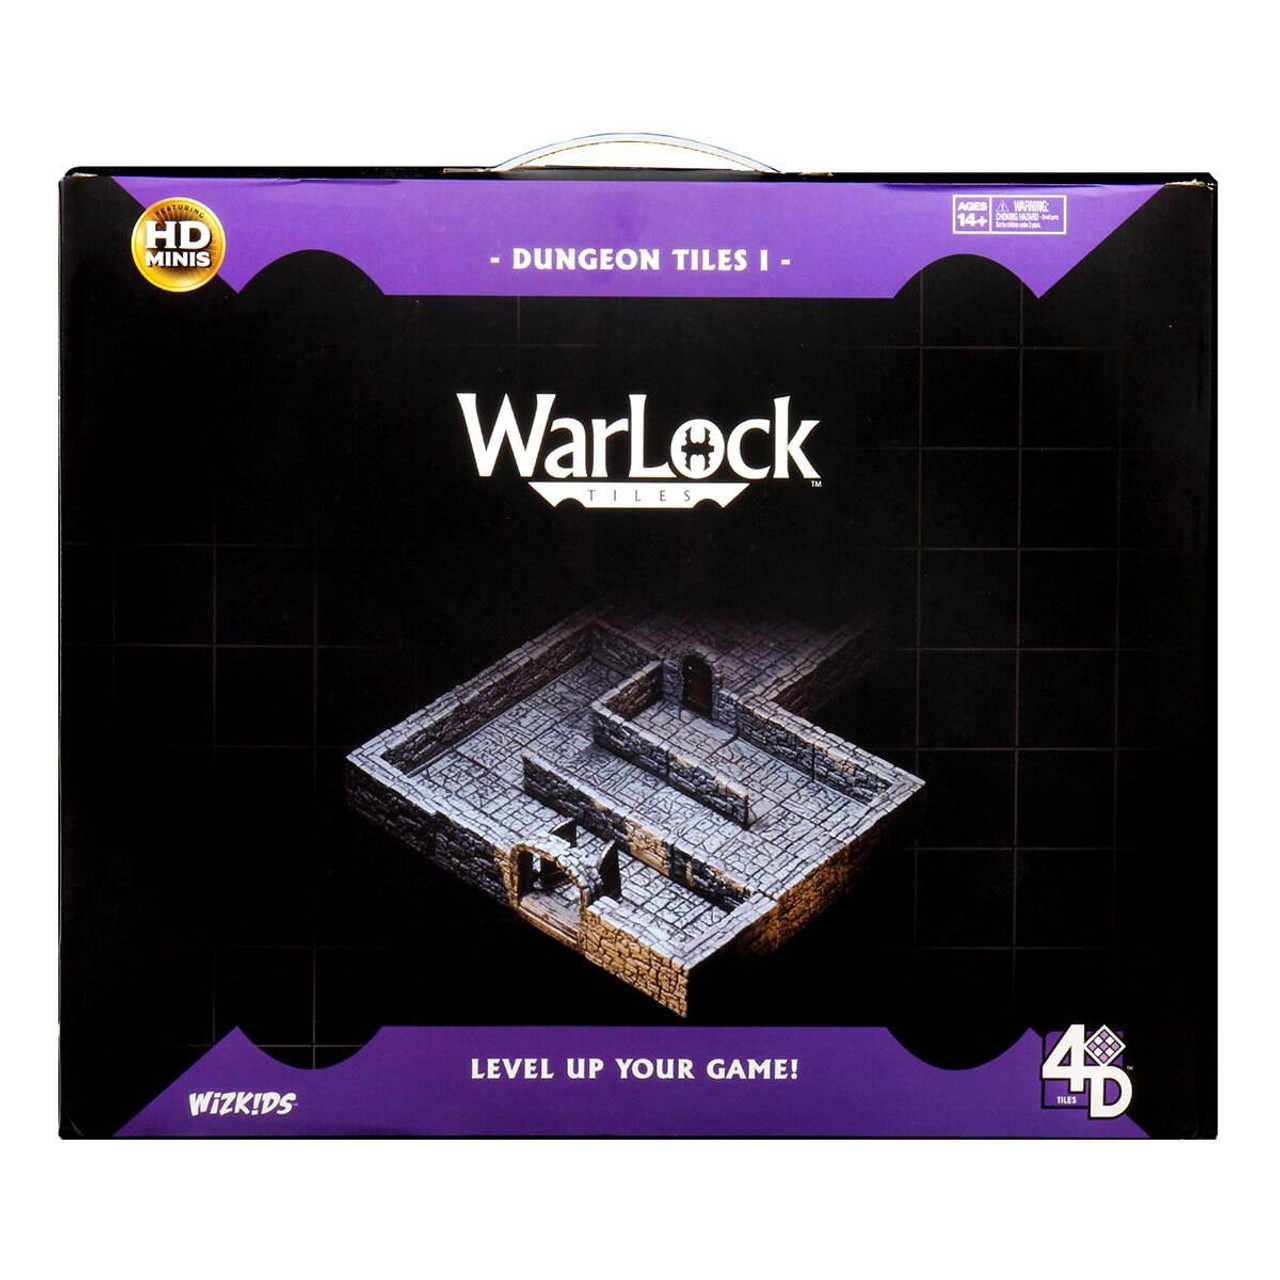 Warlock Tiles Dungeon Tiles I Wizkids Toywiz - roblox toy code collectors guide roblox dungeon quest leveling guide